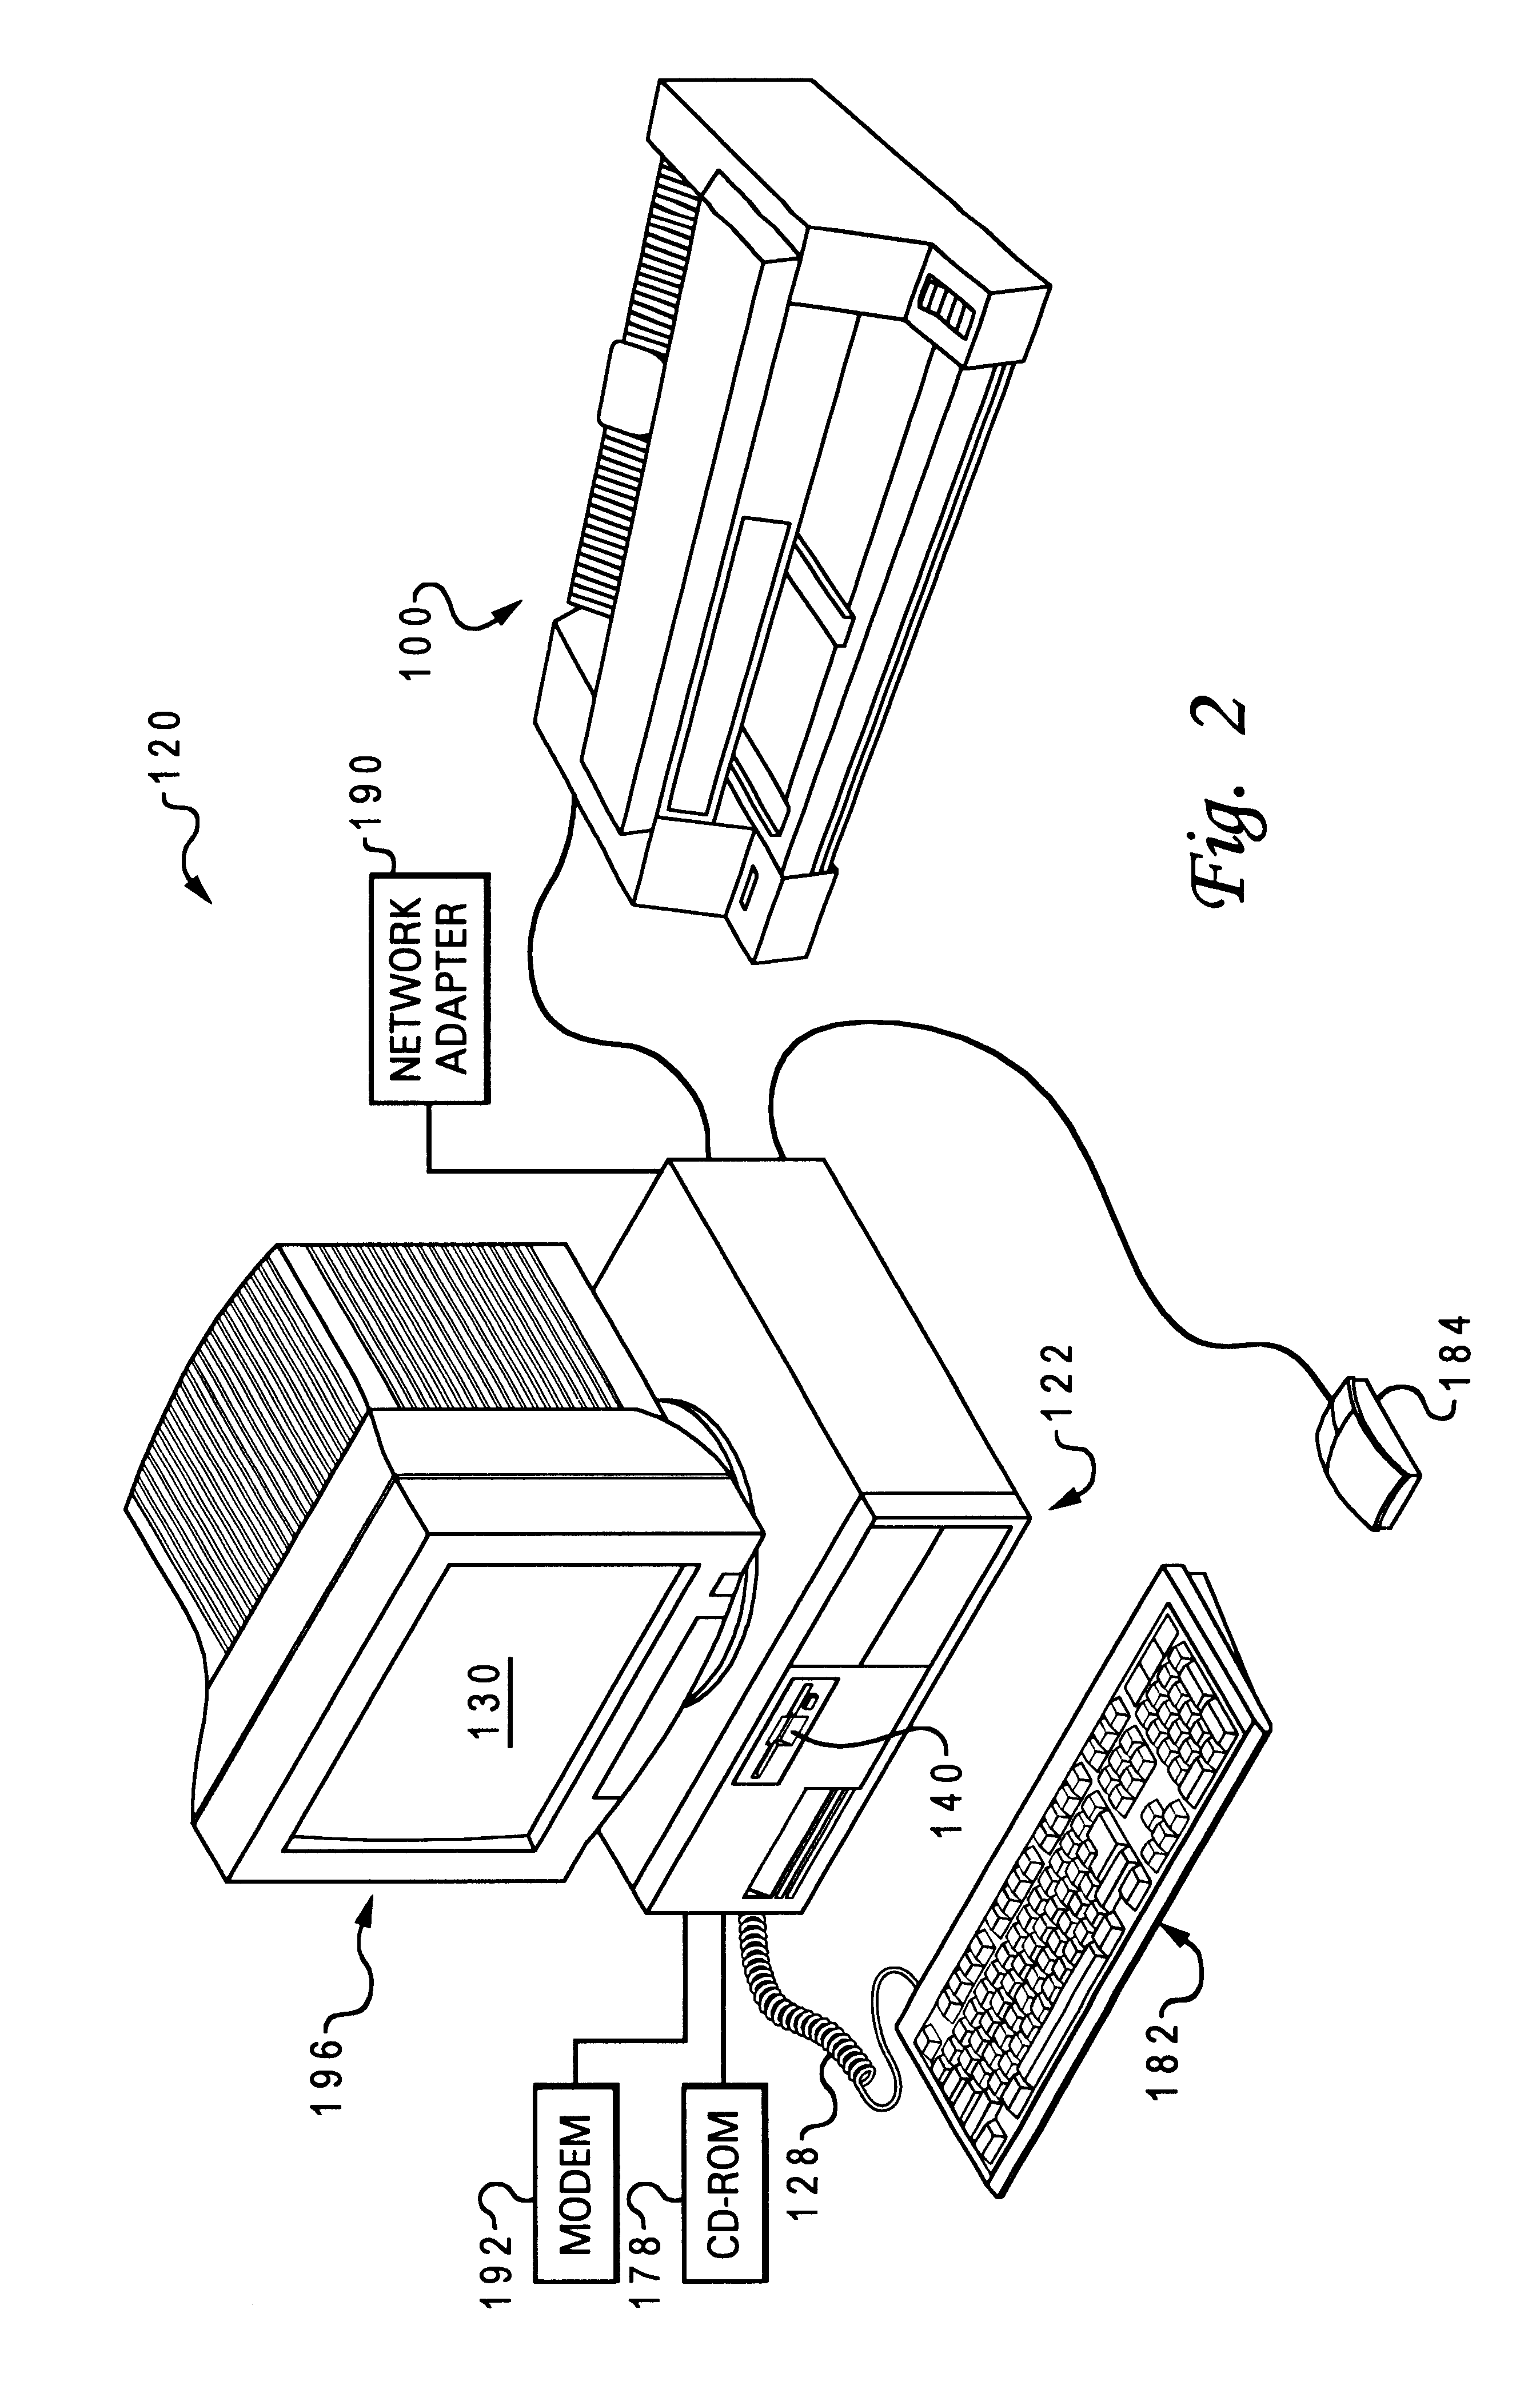 Layered local cache mechanism with split register load bus and cache load bus